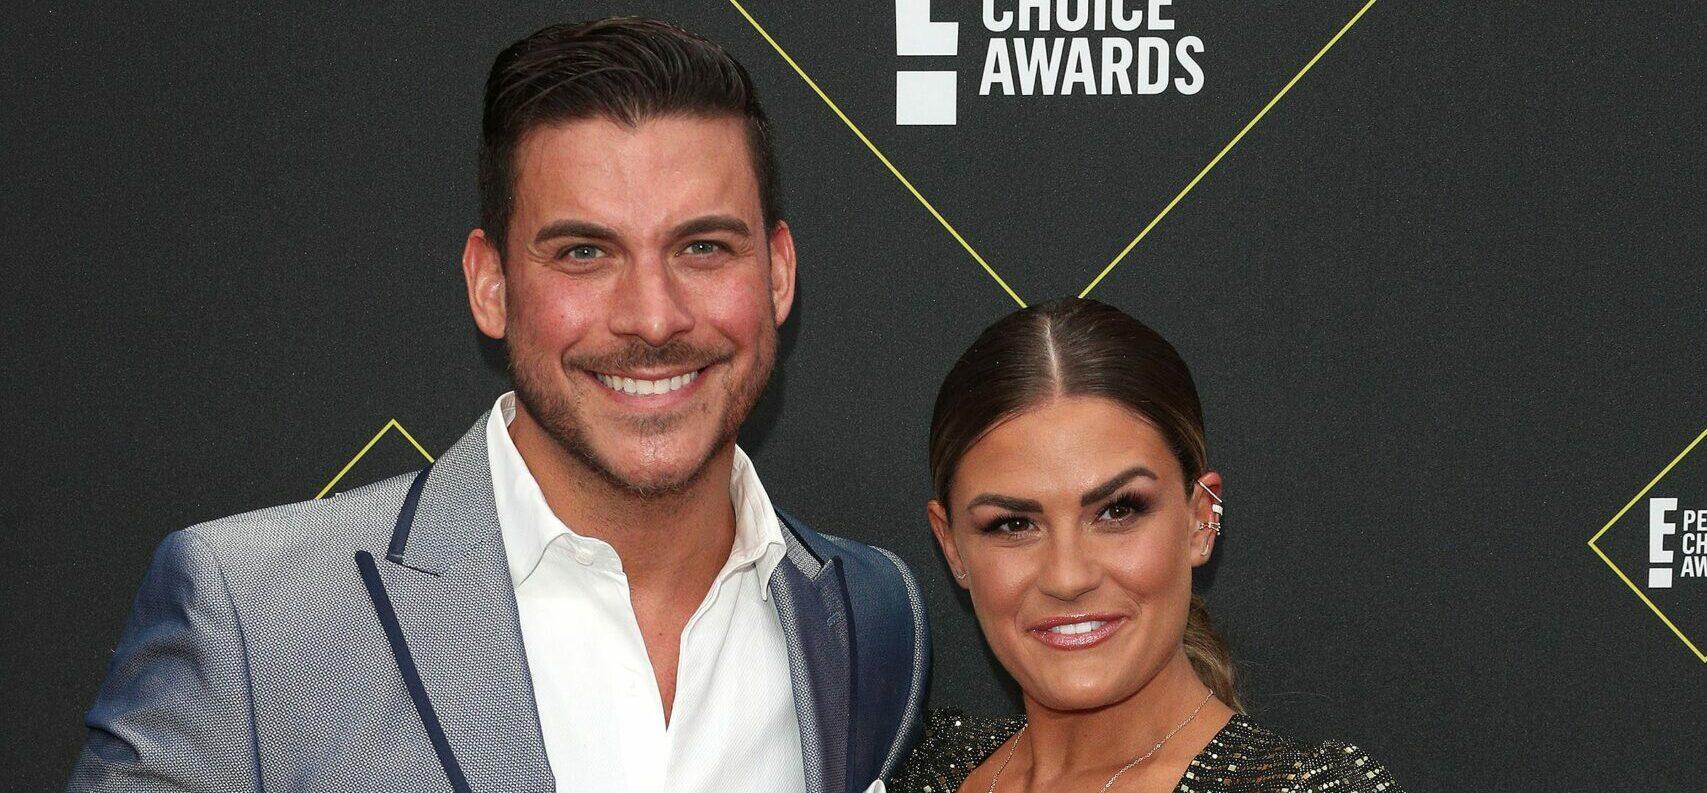 ‘Vanderpump Rules’ Jax Taylor & Brittany Cartwright SPLIT After Four Years Of Marriage